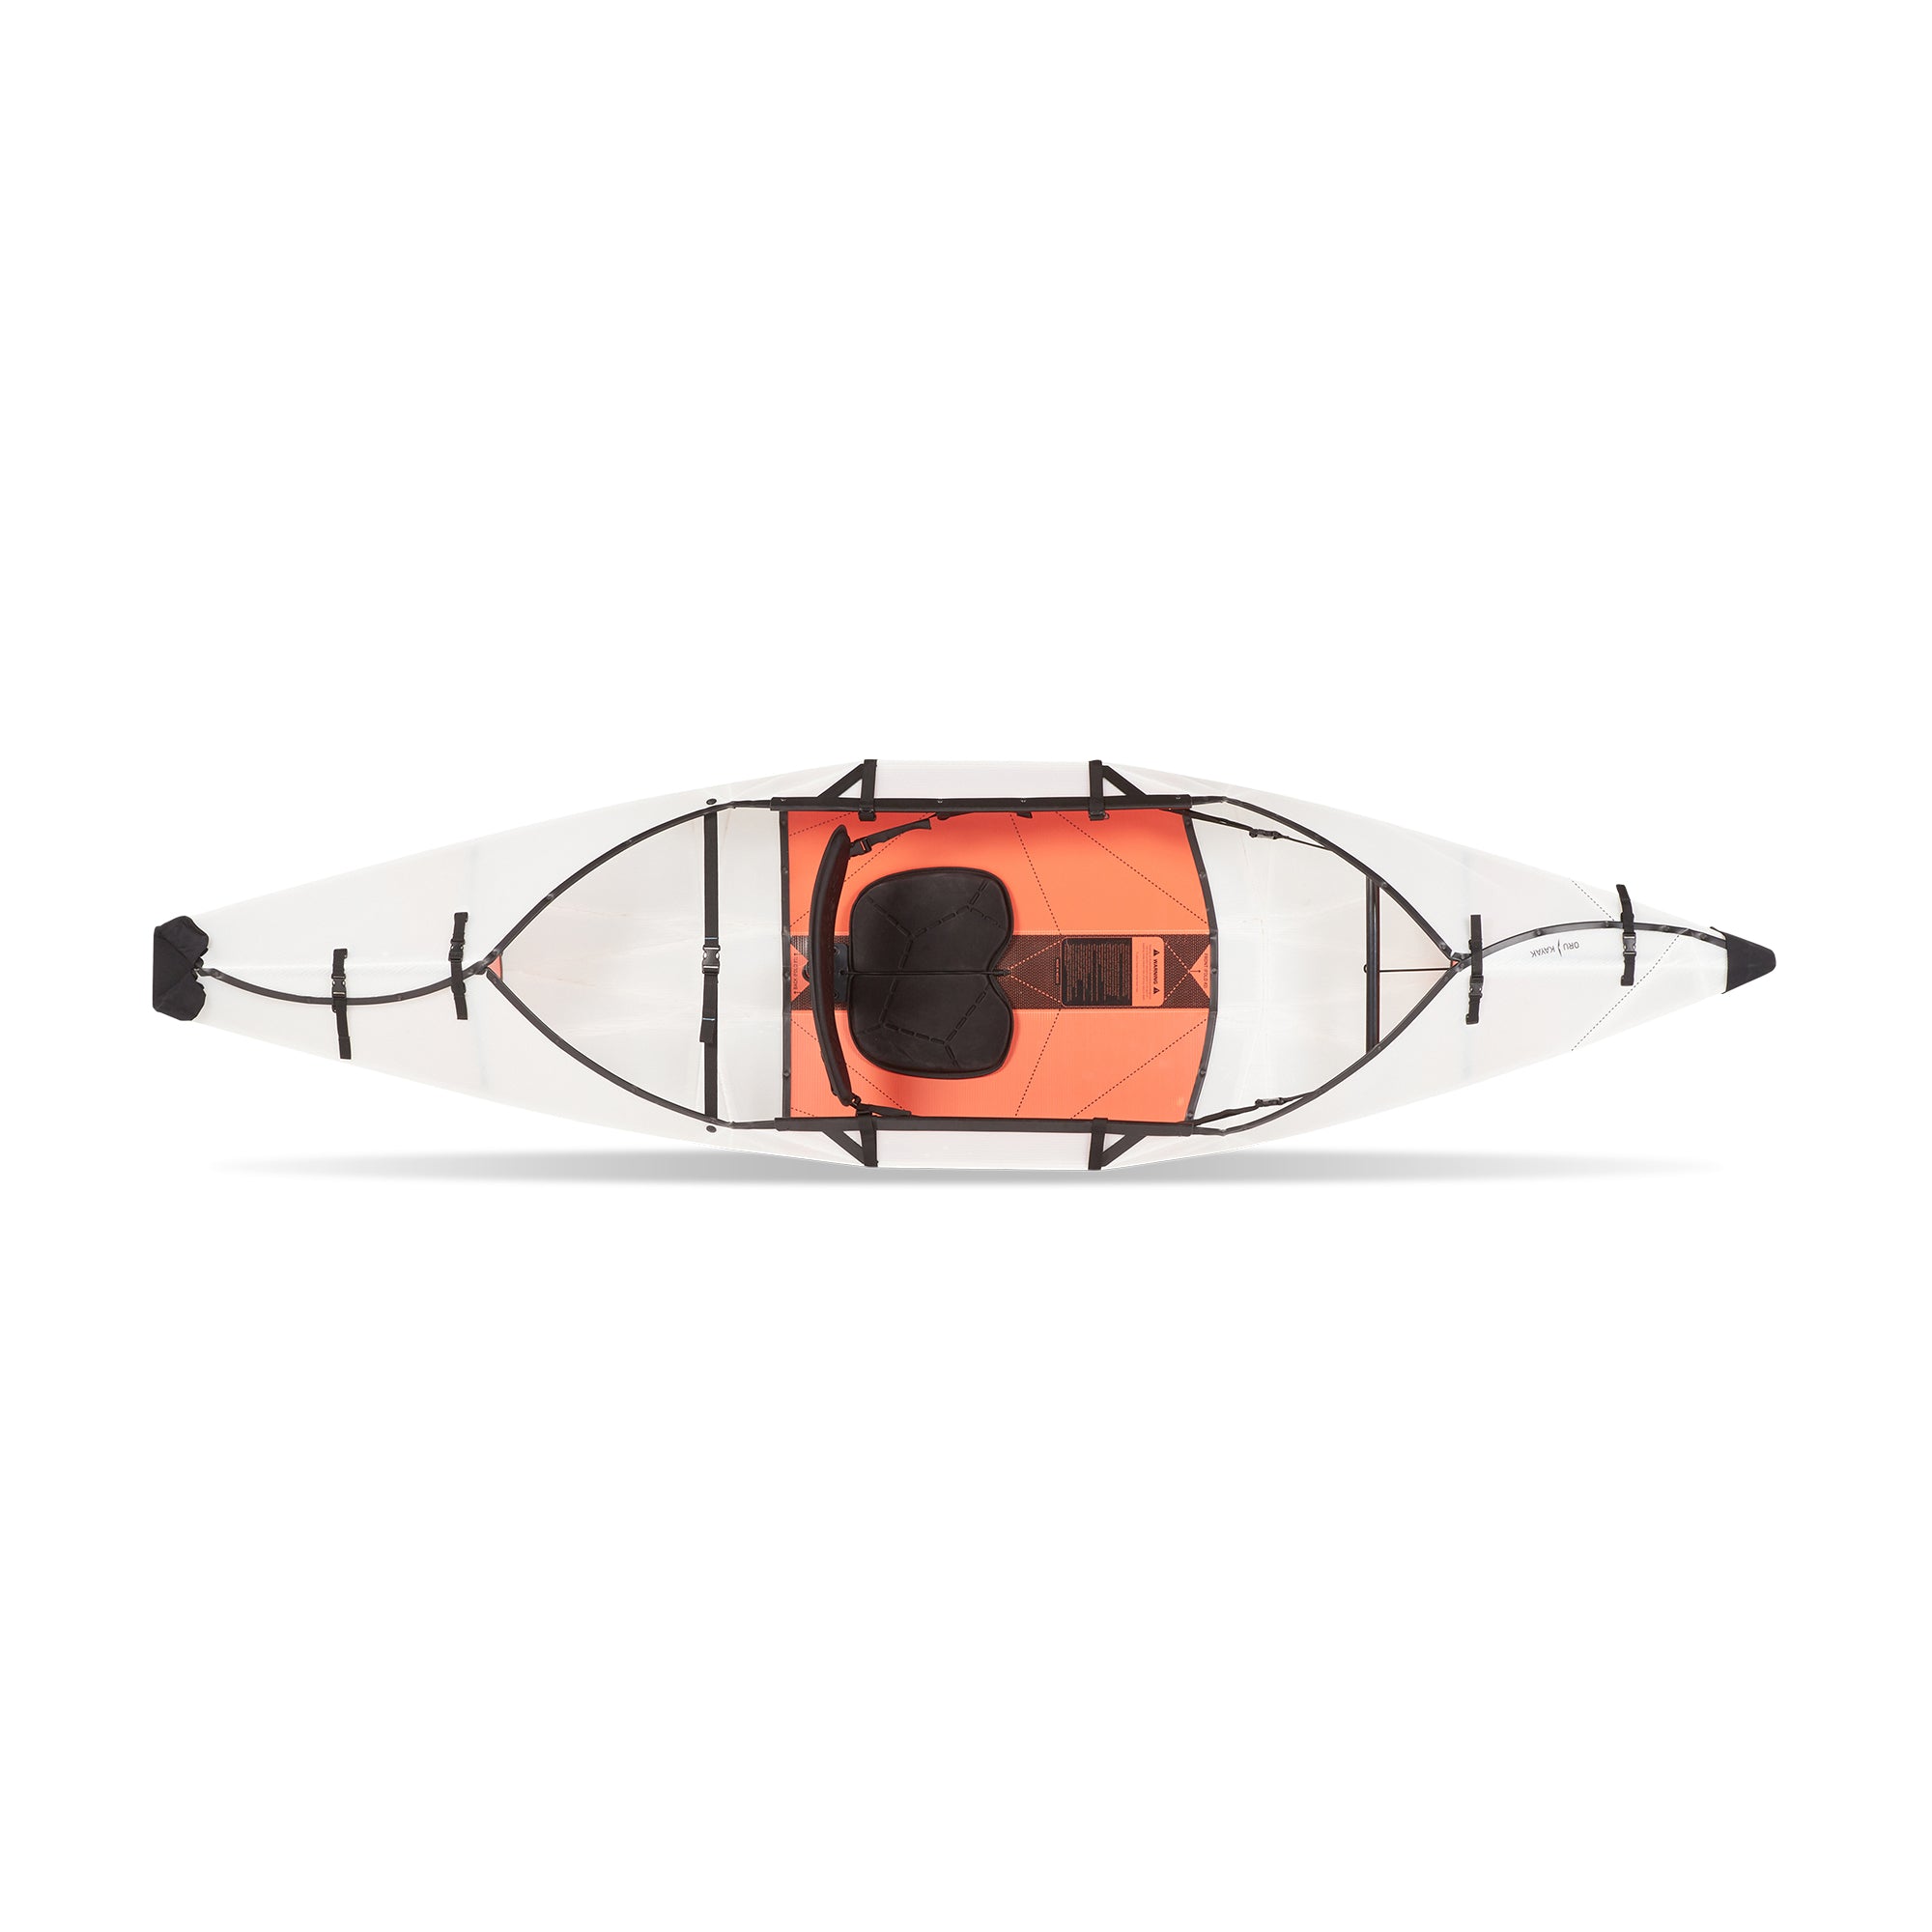 Hi right now I am talking about Kayak Fishing Gear & Equipment. A